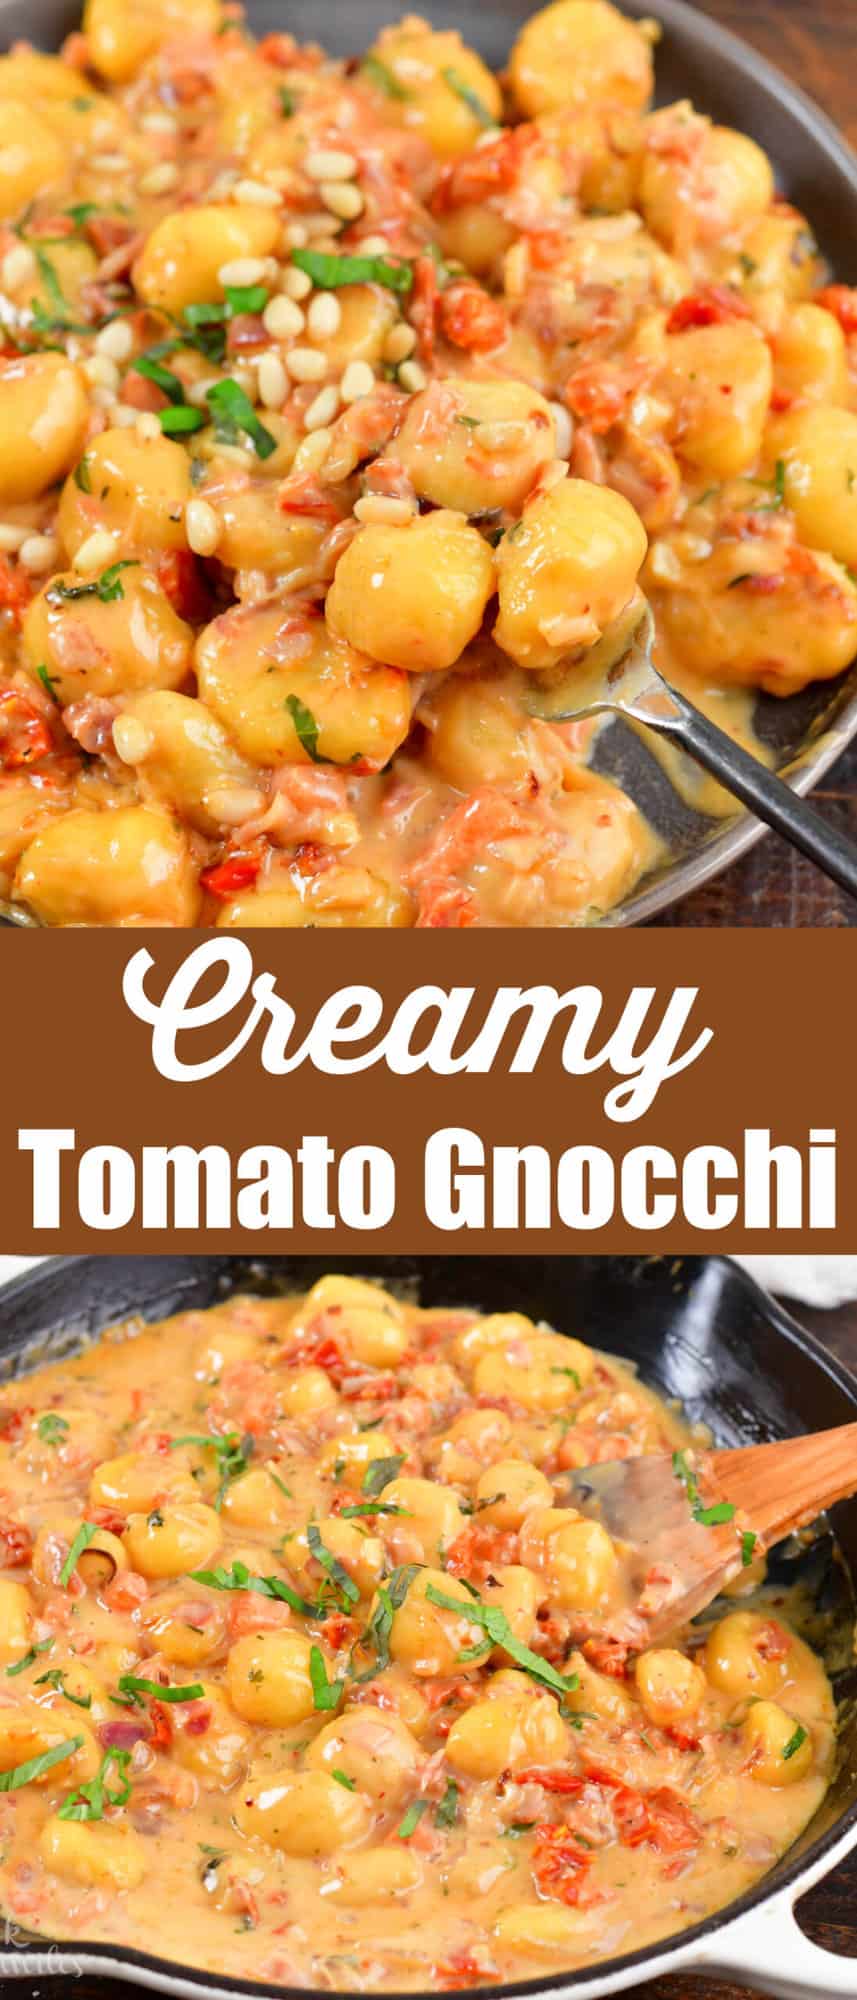 collage of two closeup images of cooked creamy tomato gnocchi